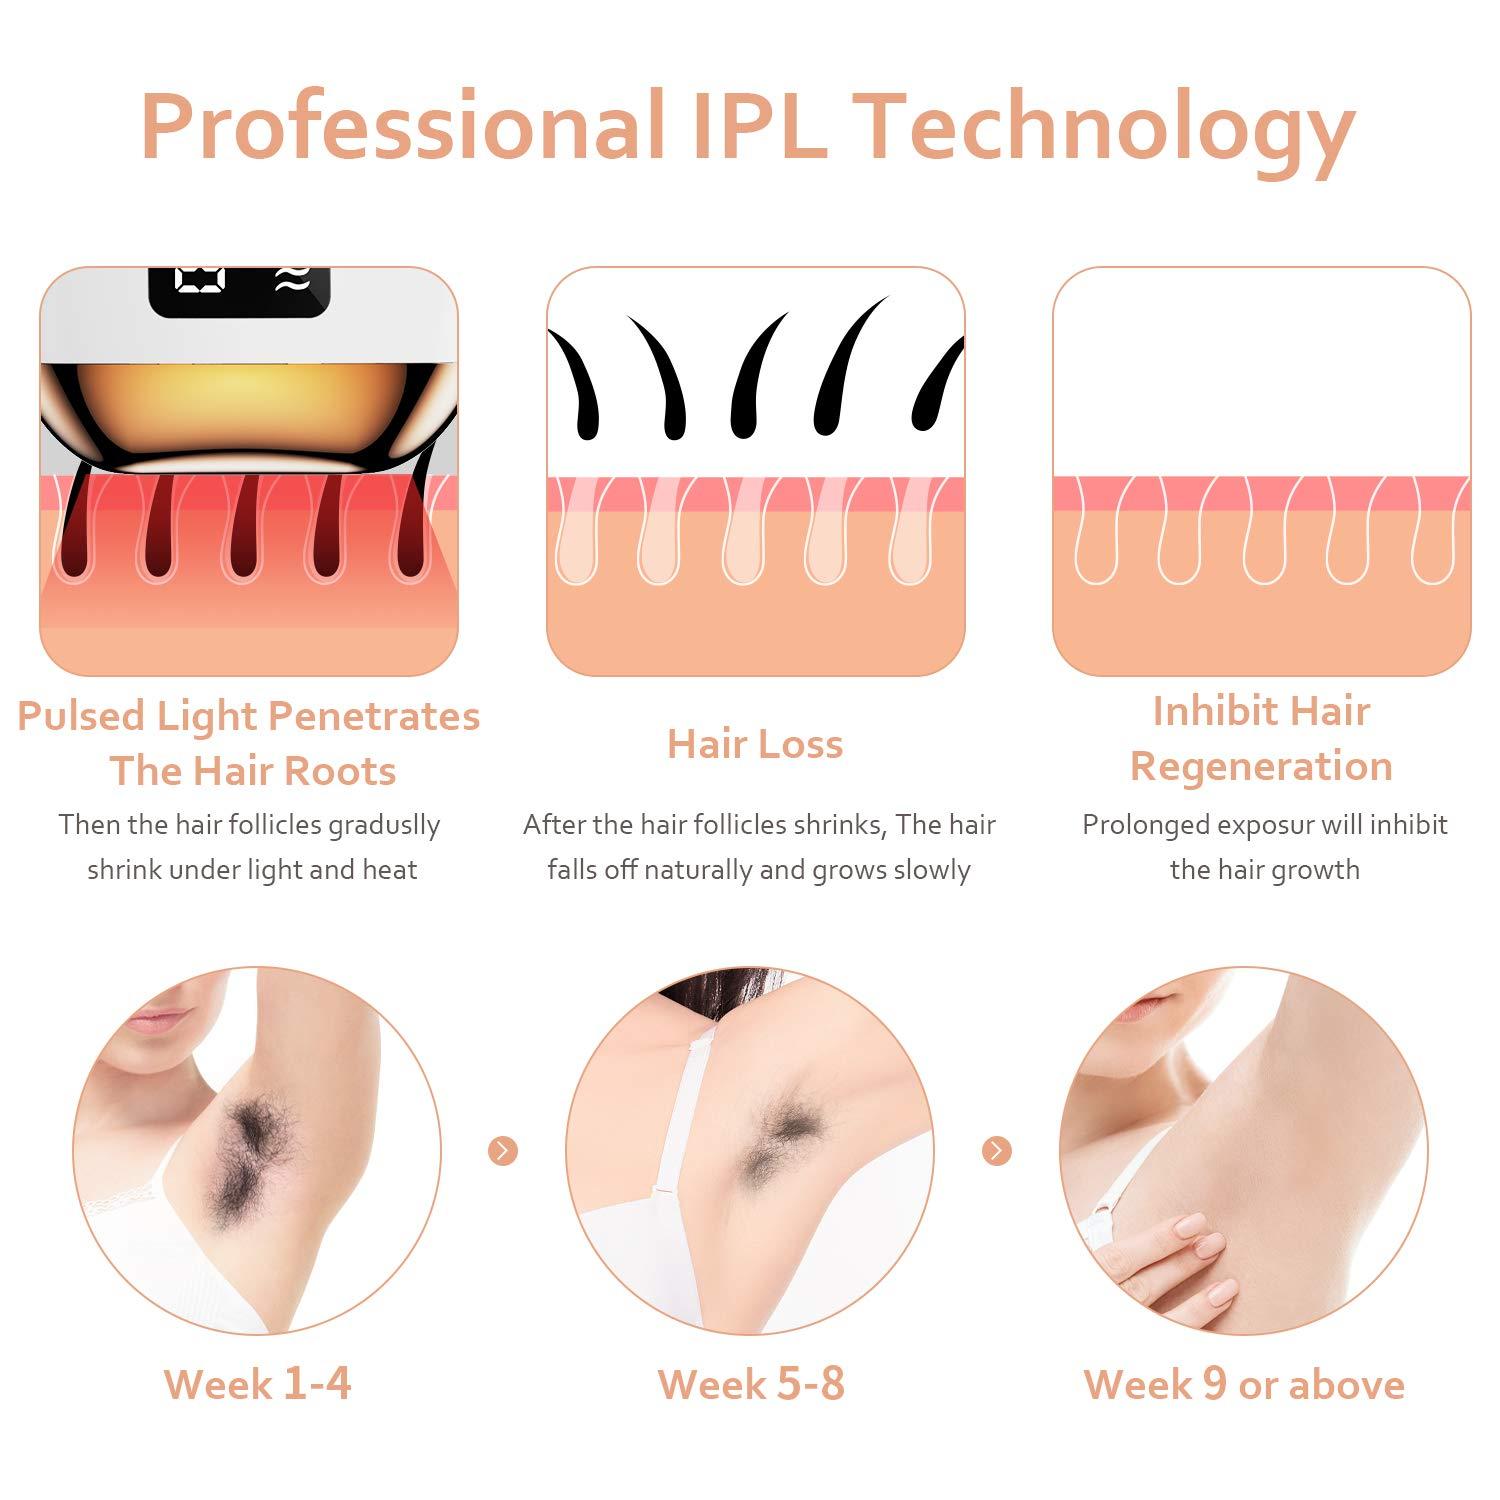 At-Home IPL Hair Removal for Women and Men,Laser Hair Removal 99,999  Flashes Painless Hair Remover for Facial Legs Arms Armpits Whole Body  Treatment WHITE